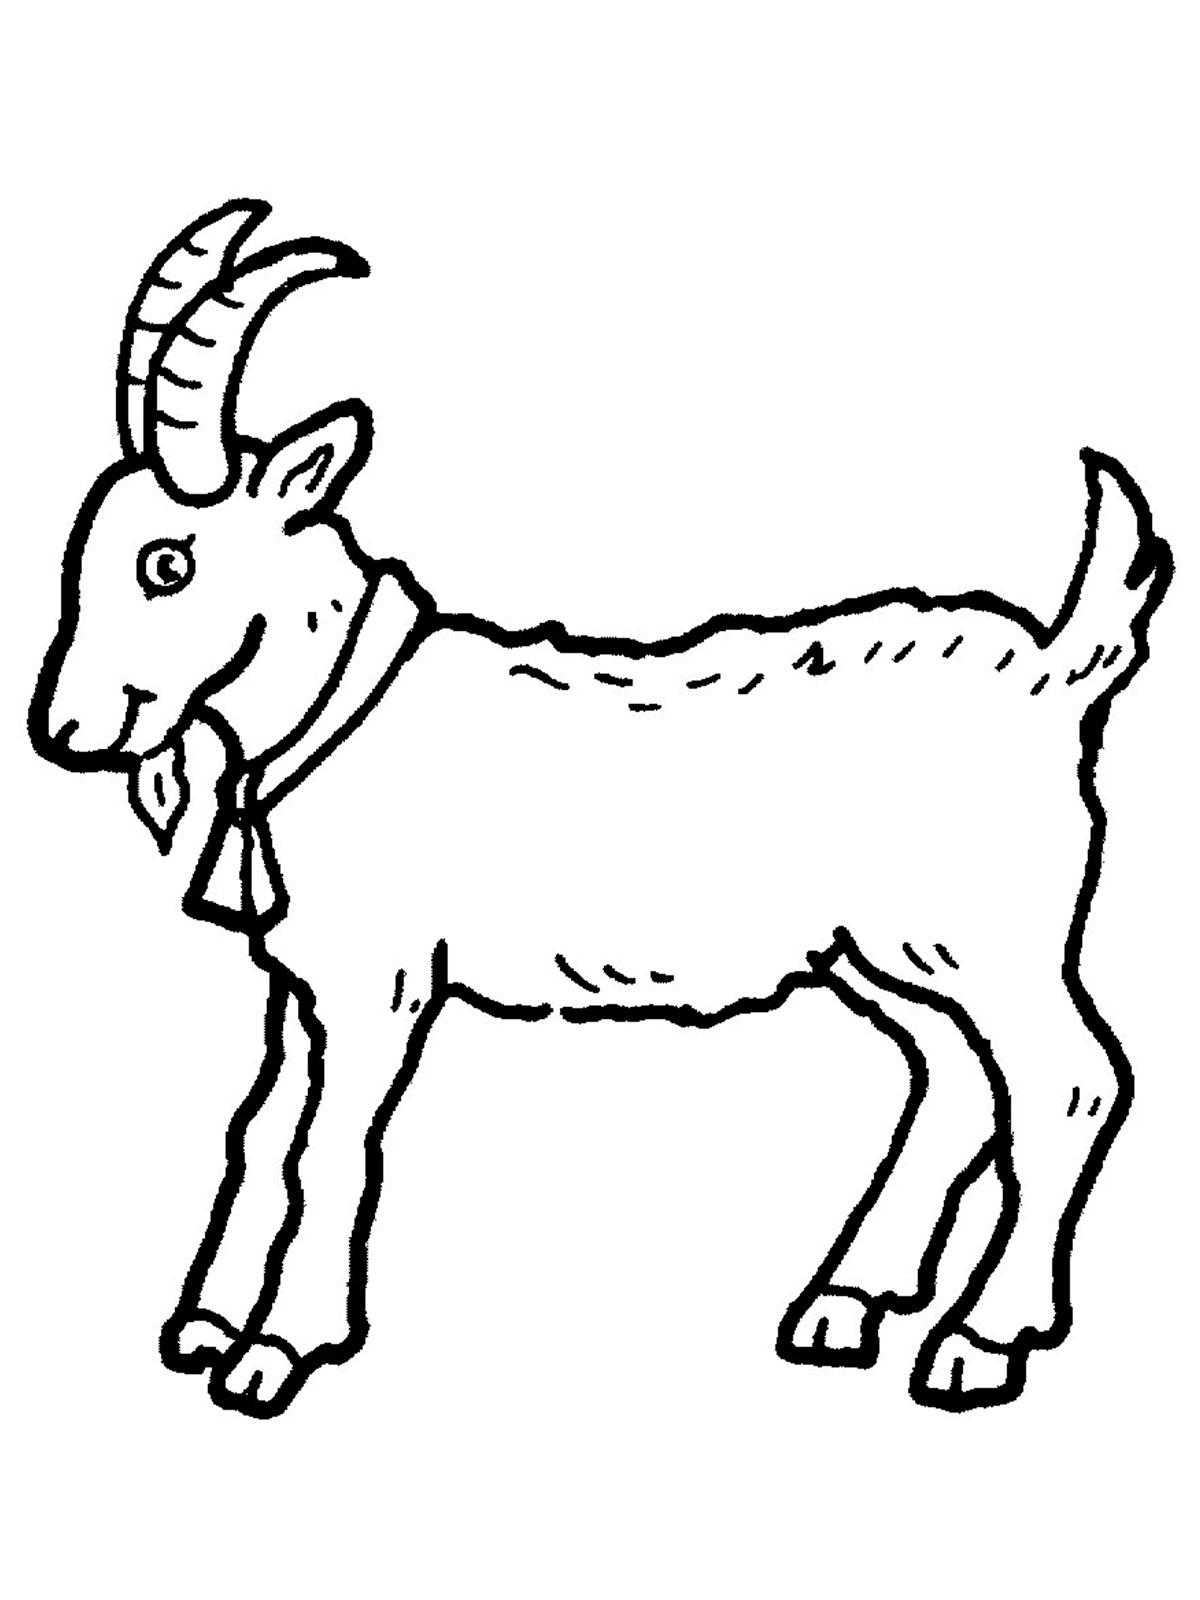 Coloring Goat. Category Pets allowed. Tags:  goat.